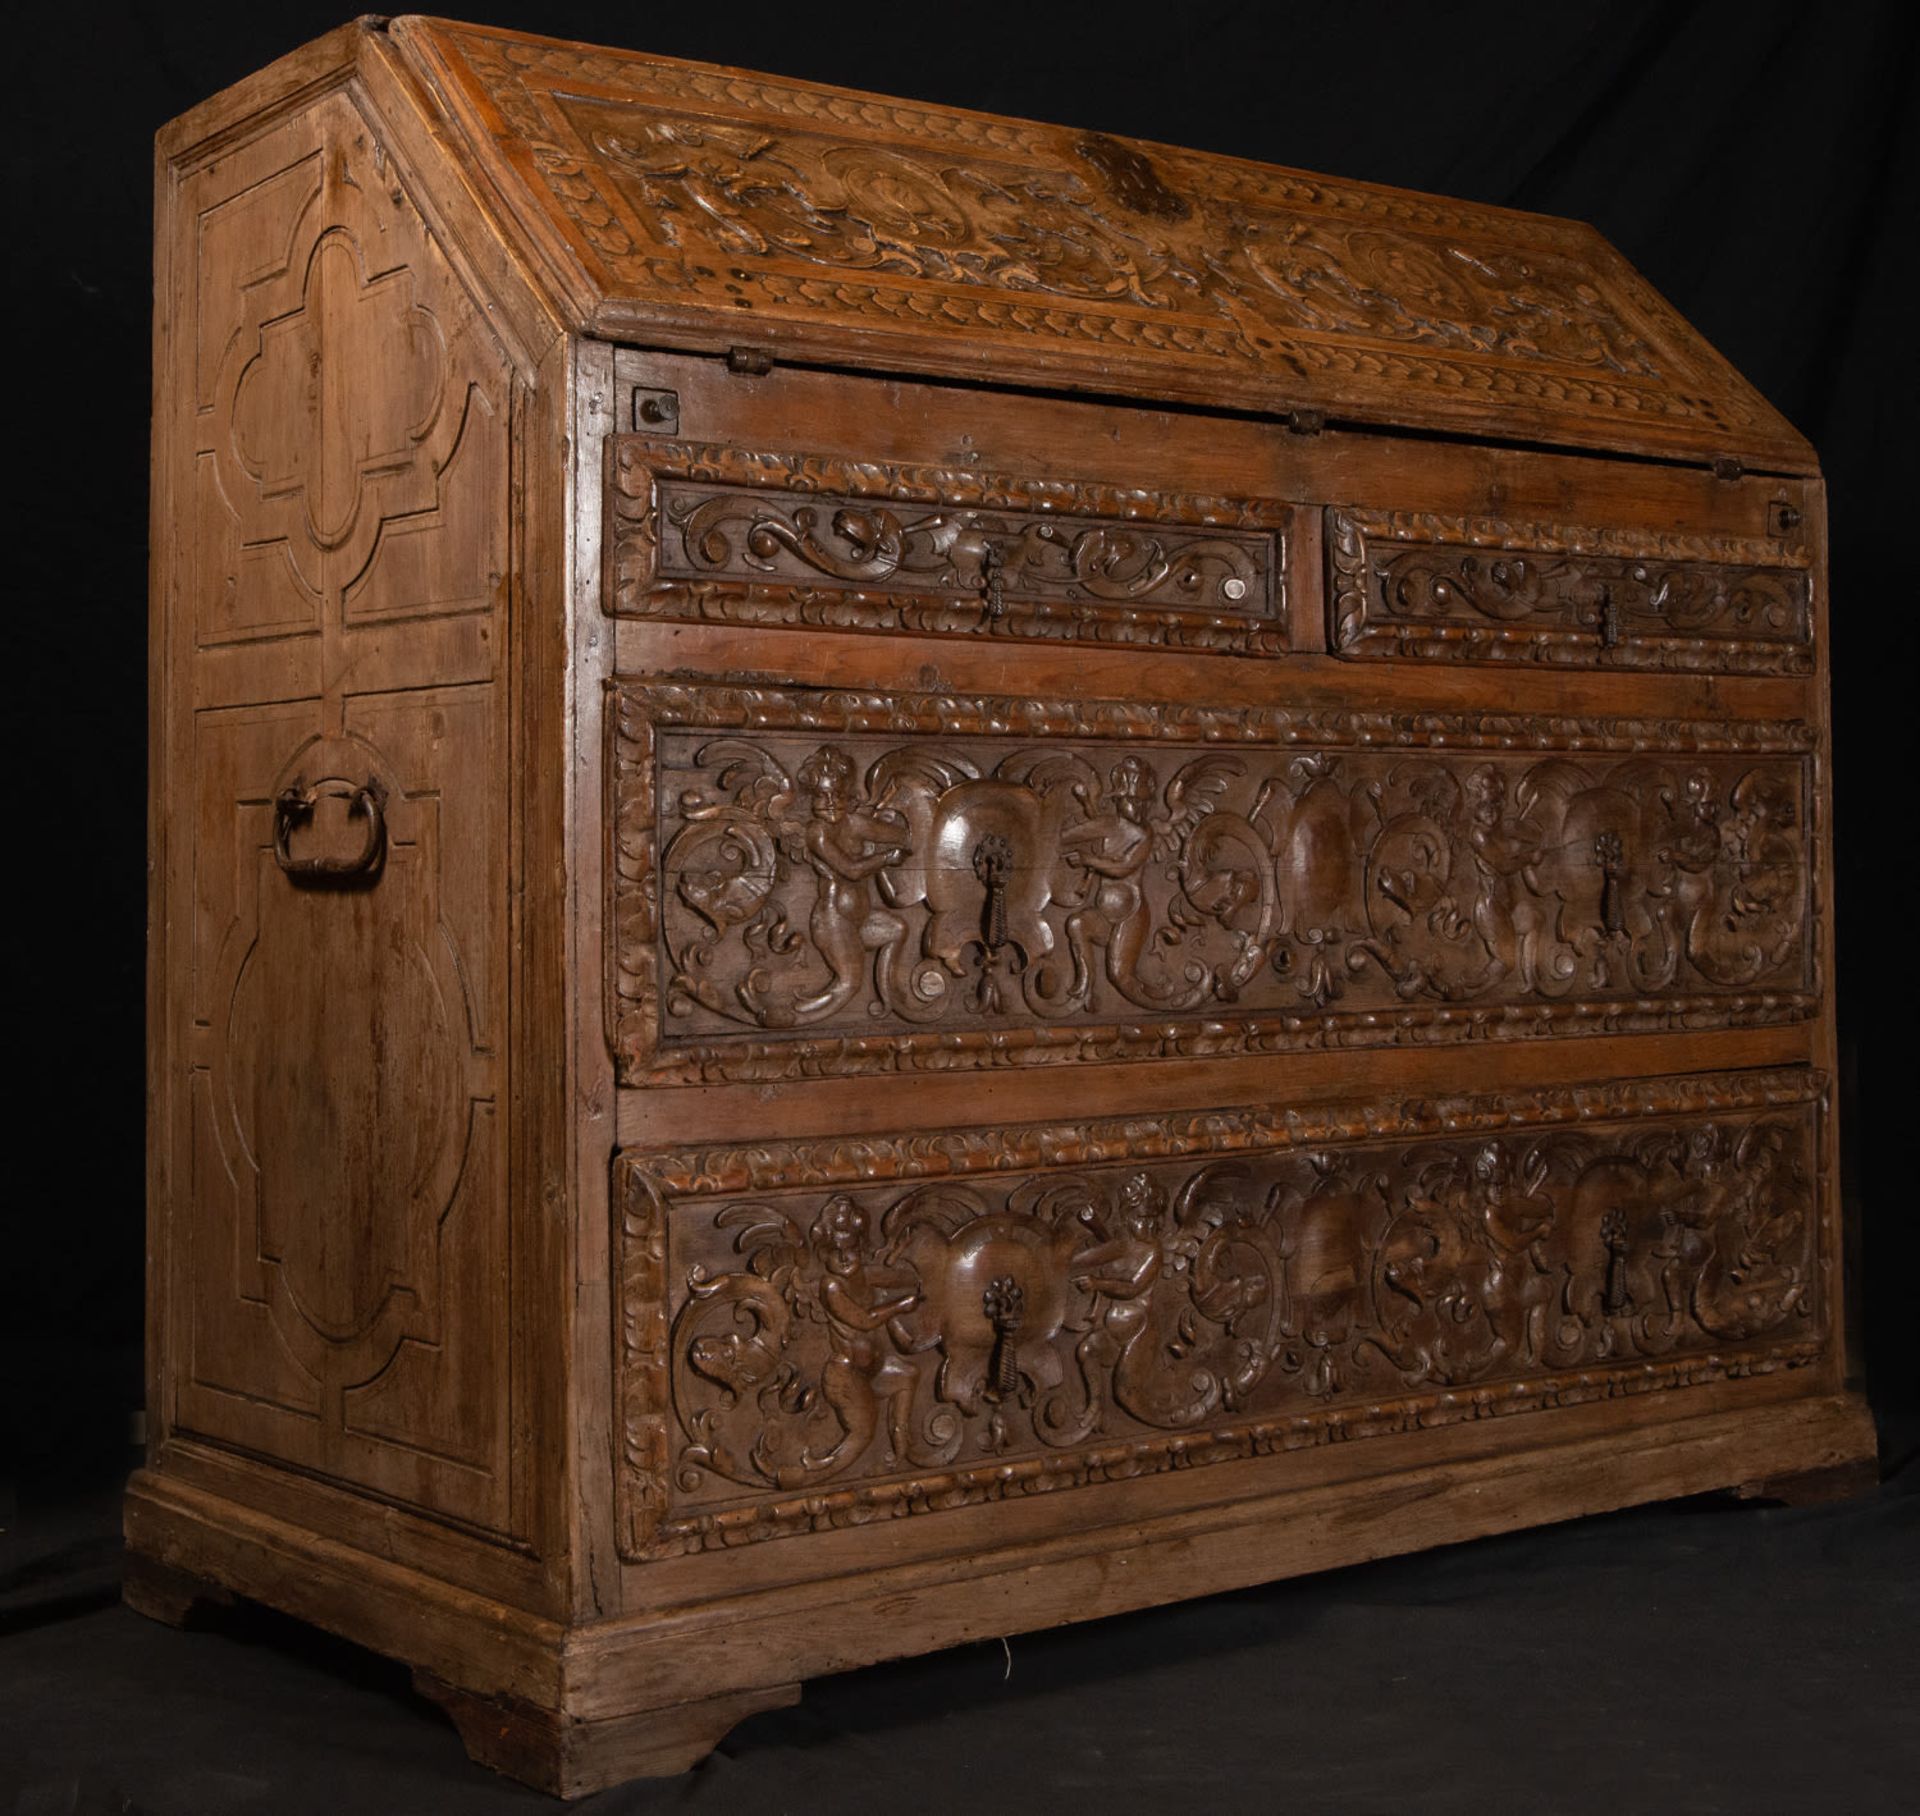 Exceptional Plateresque Desk Cabinet, Spanish Renaissance school of the 16th century - Image 8 of 9